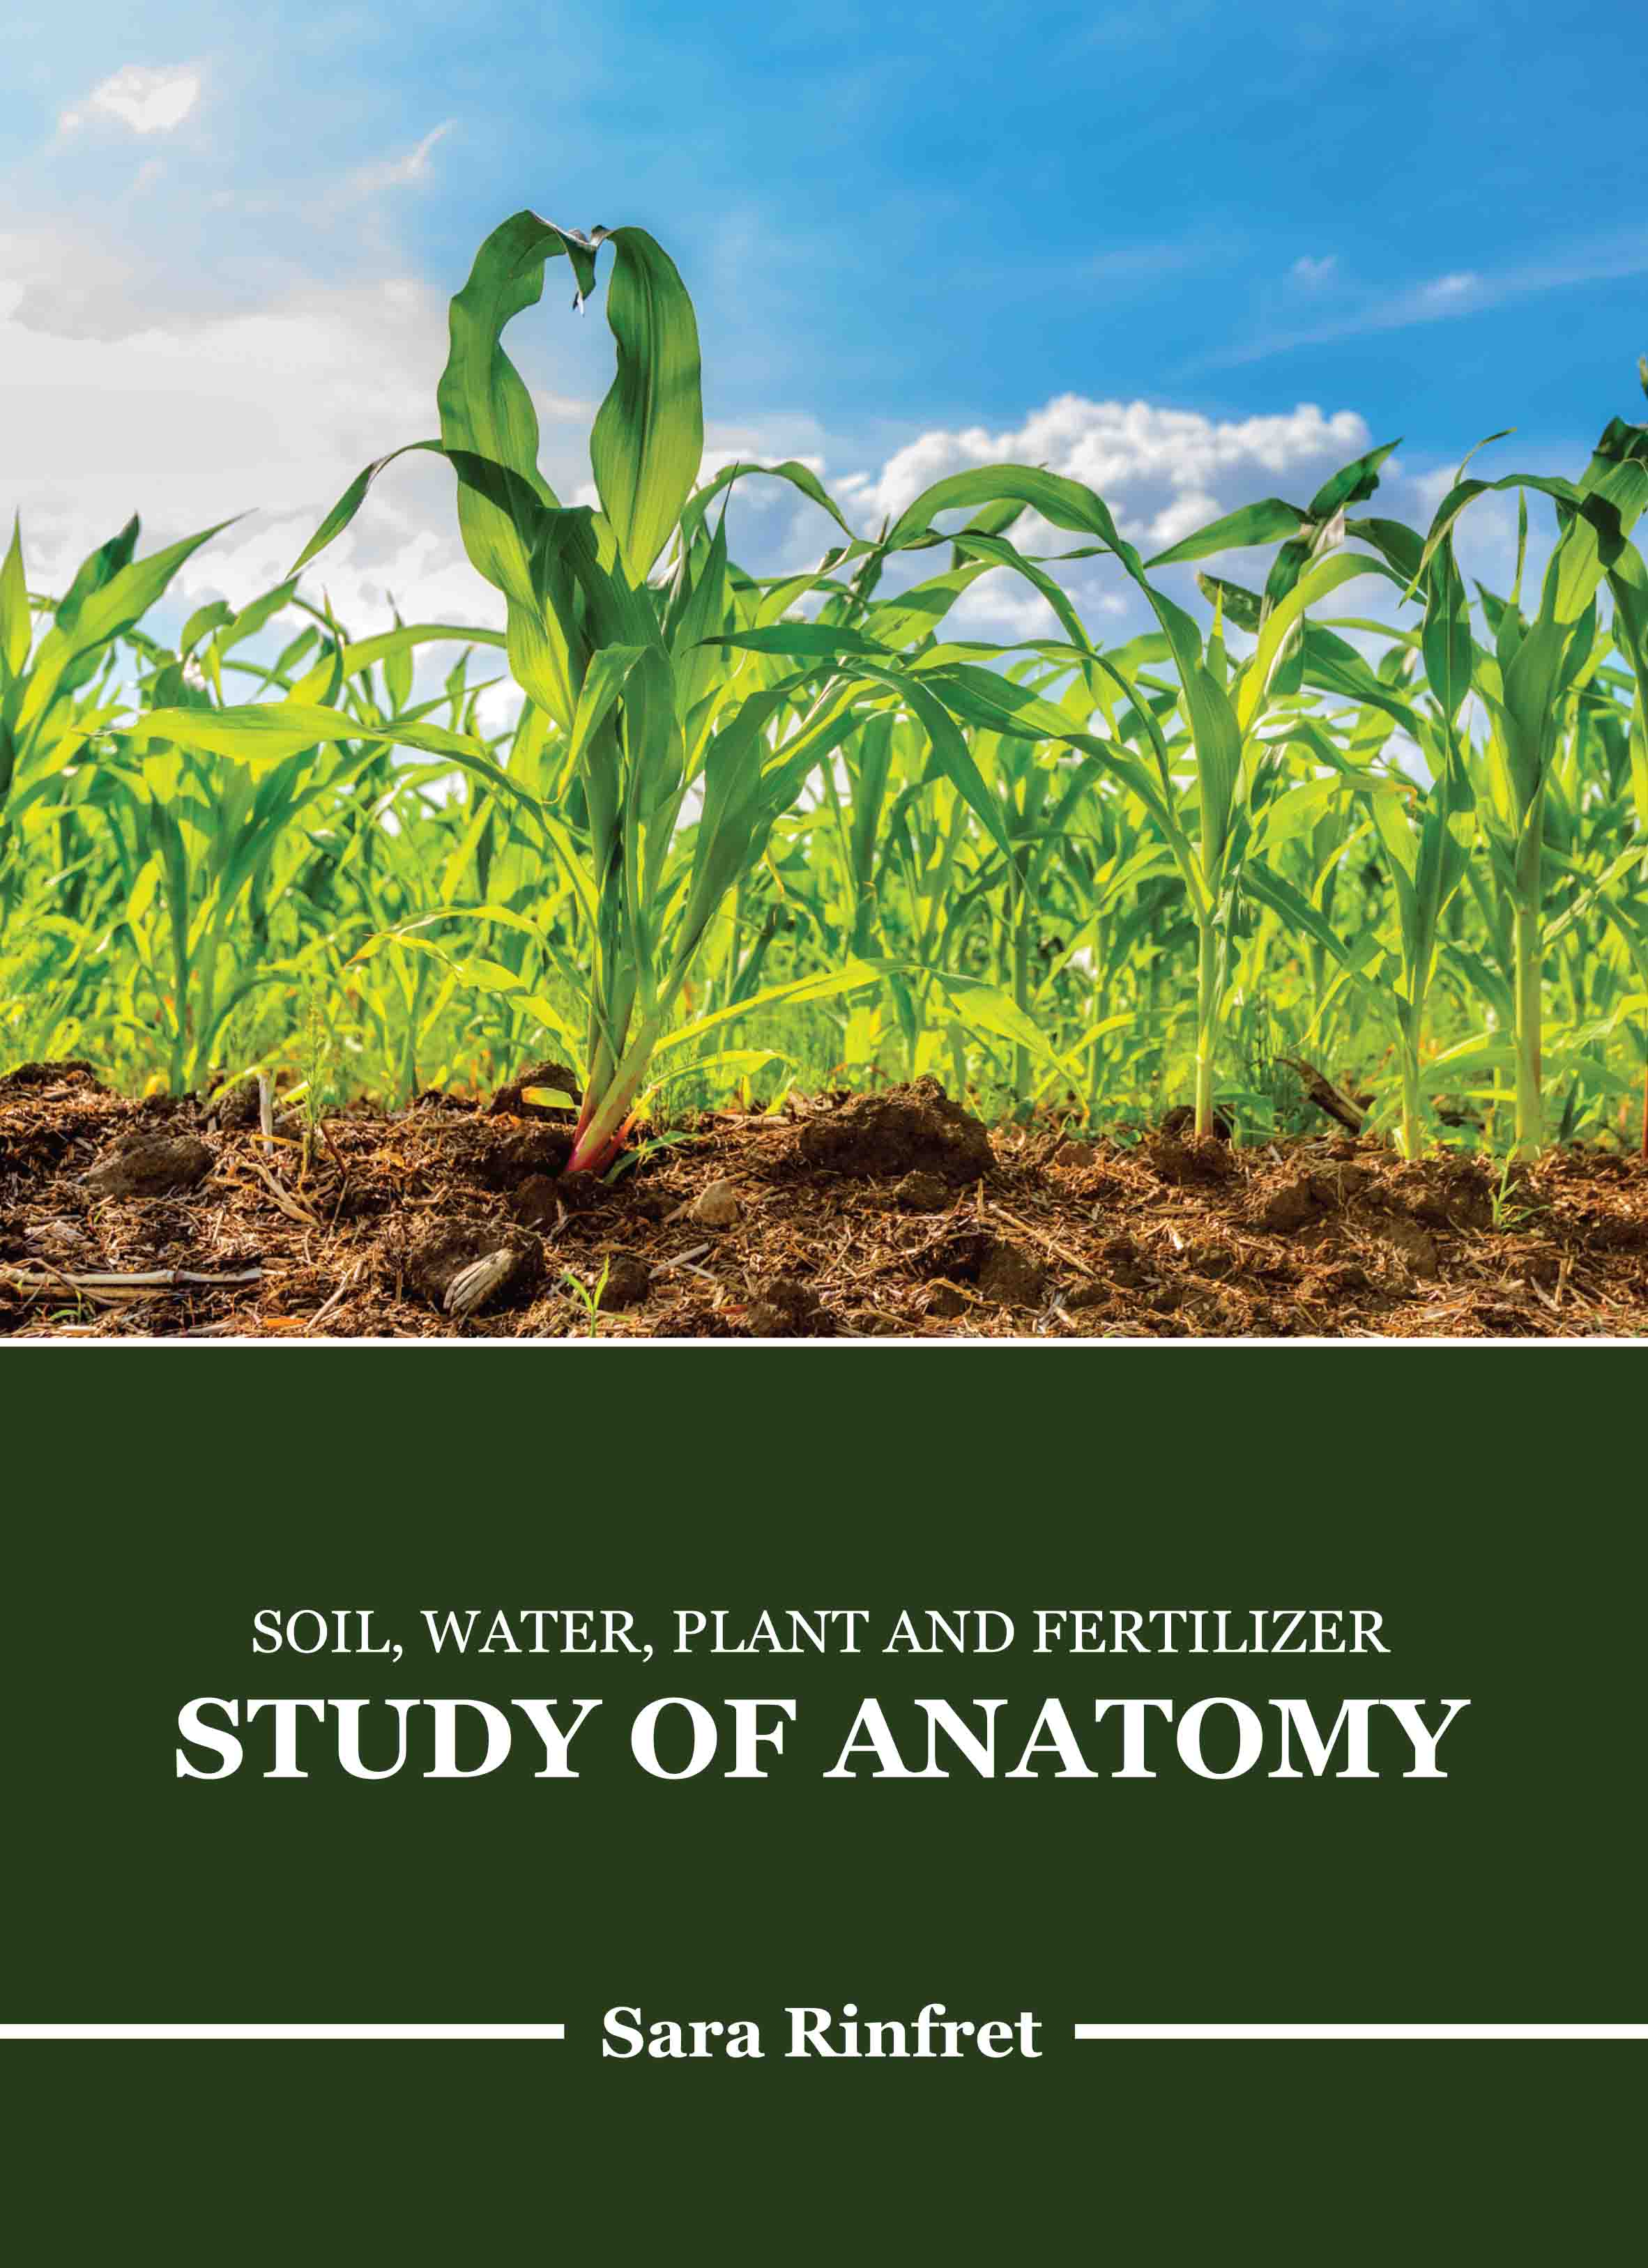 Soil, Water, Plant and Fertilizer: Study of Anatomy